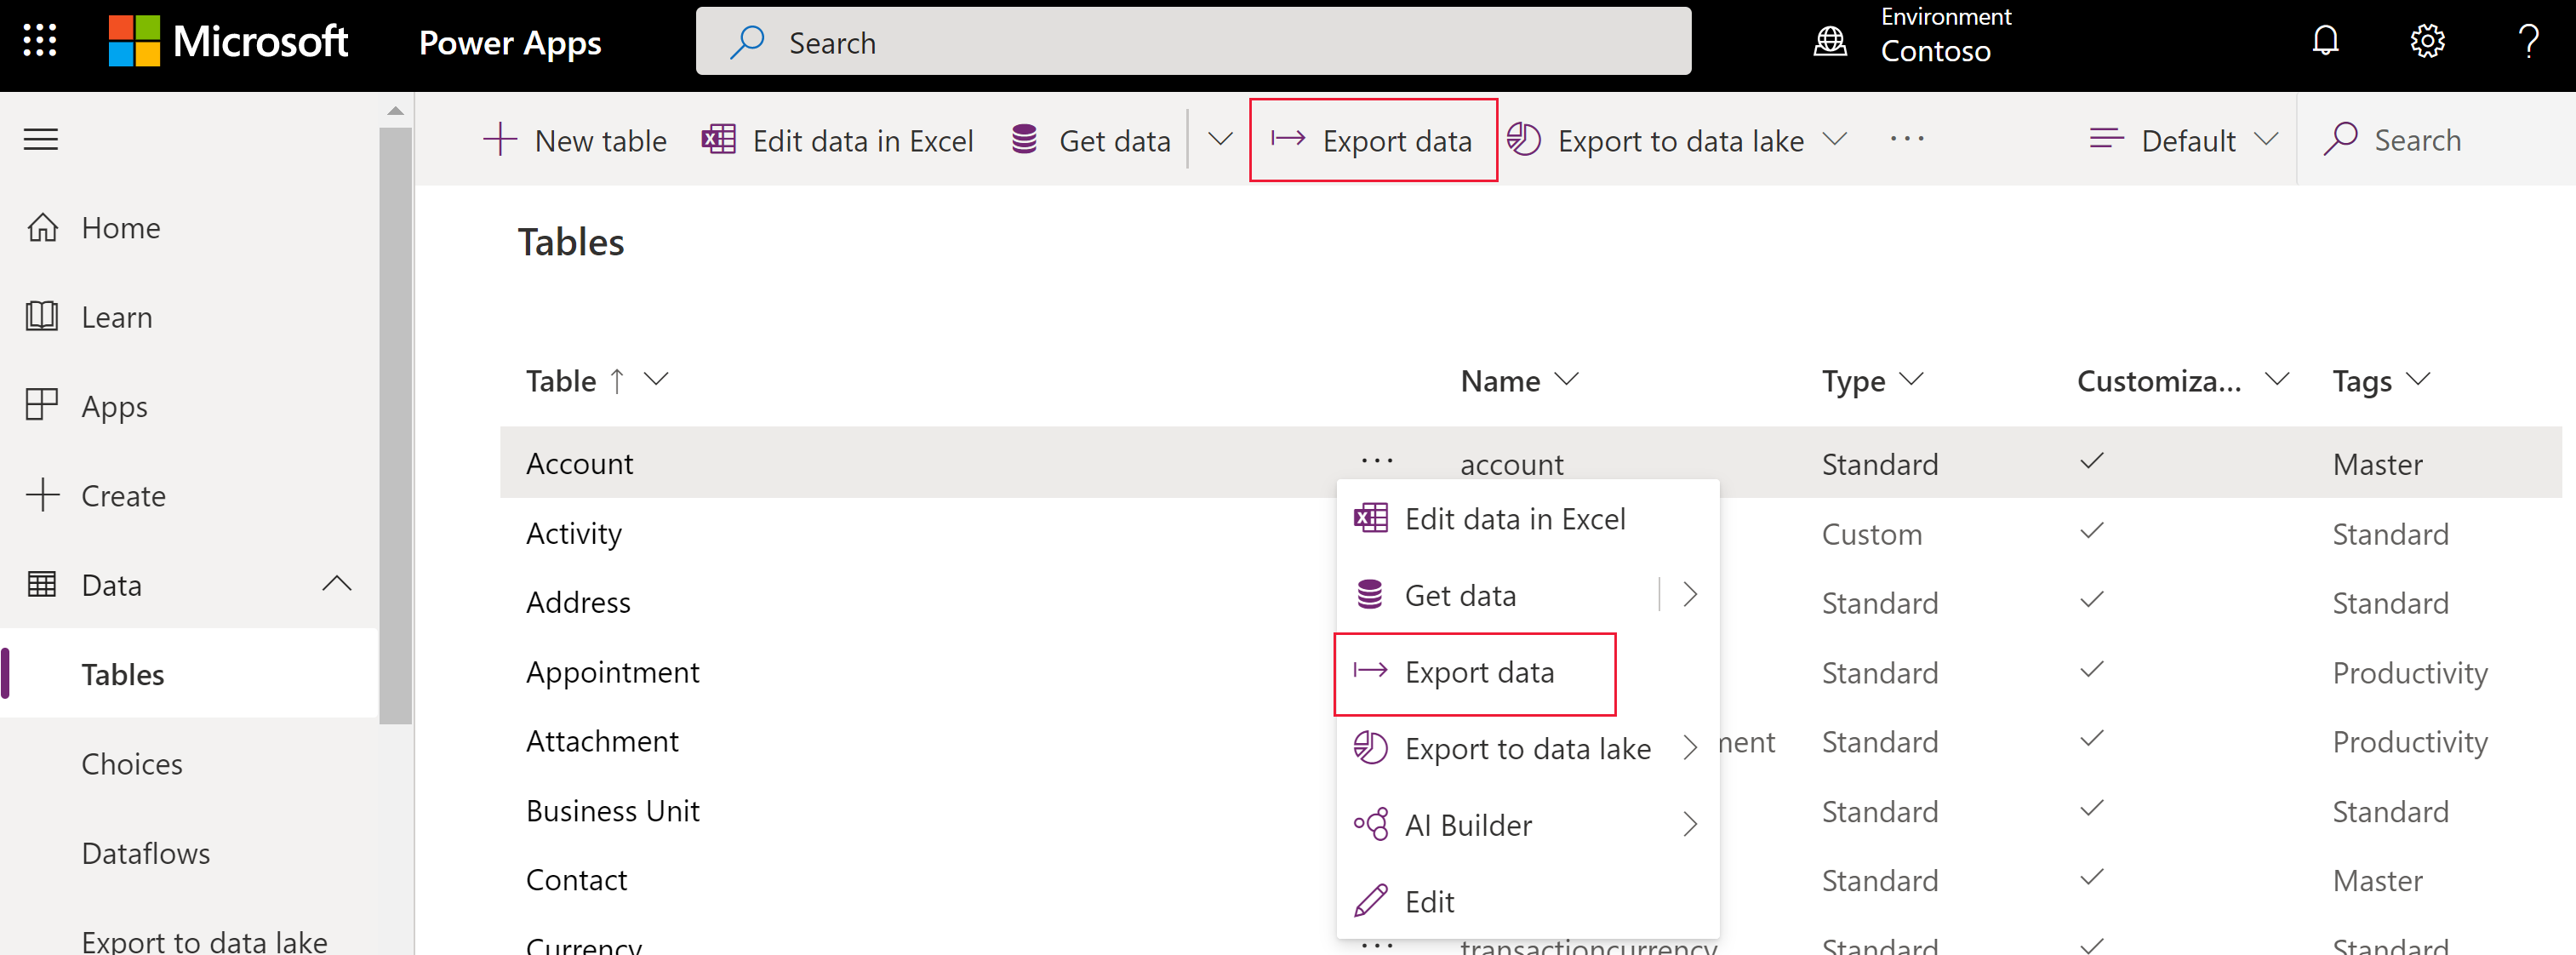 Example of exporting data from an Account table.